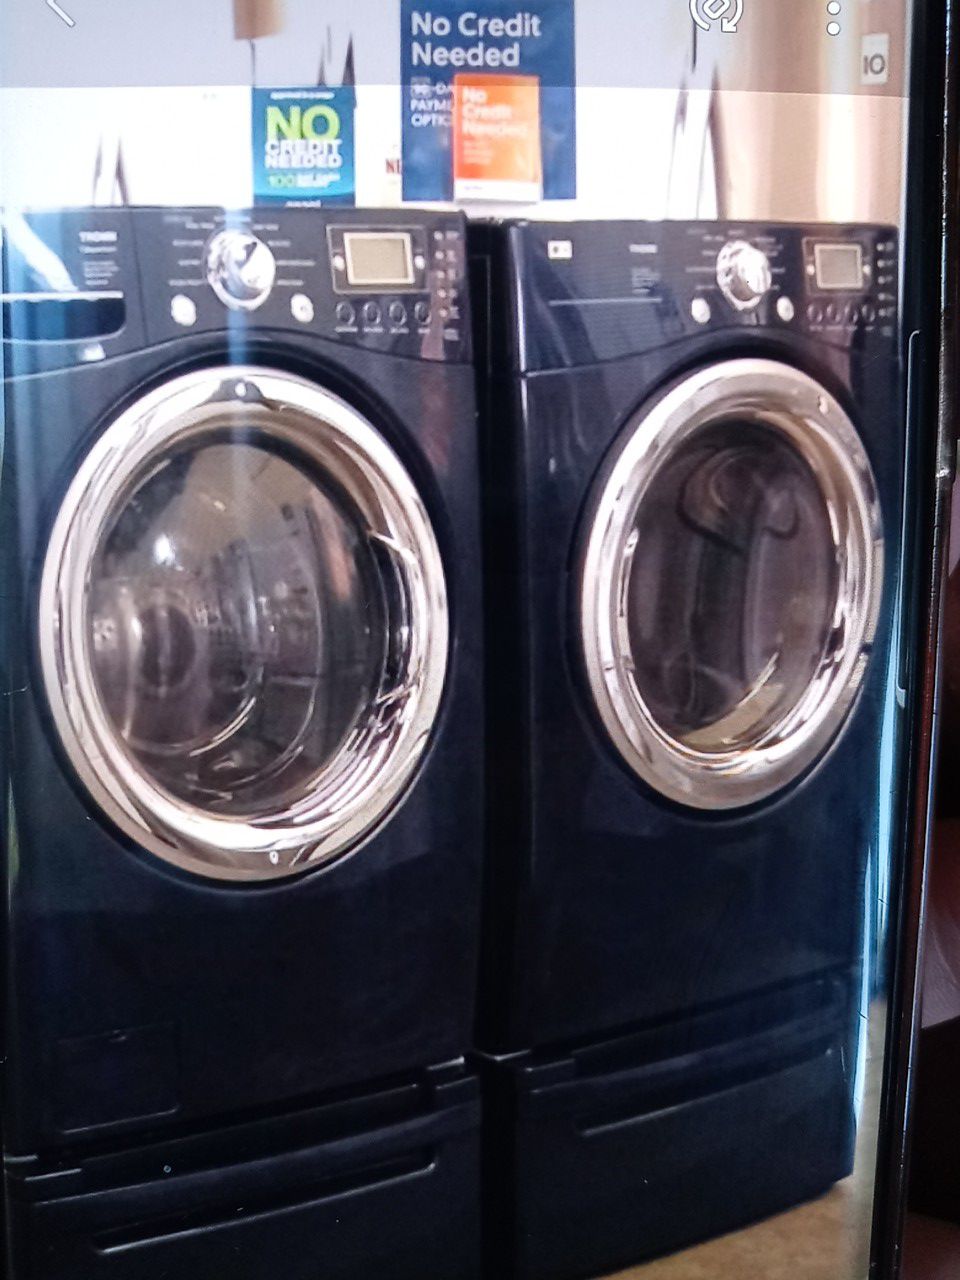 🍊Like new 🍒🍒🍍reconditioned refrigerator washer dryer stove stackable+financing available a free warranty*te🌻🐟l 2=06*50*3*8-62**5🍏🍍